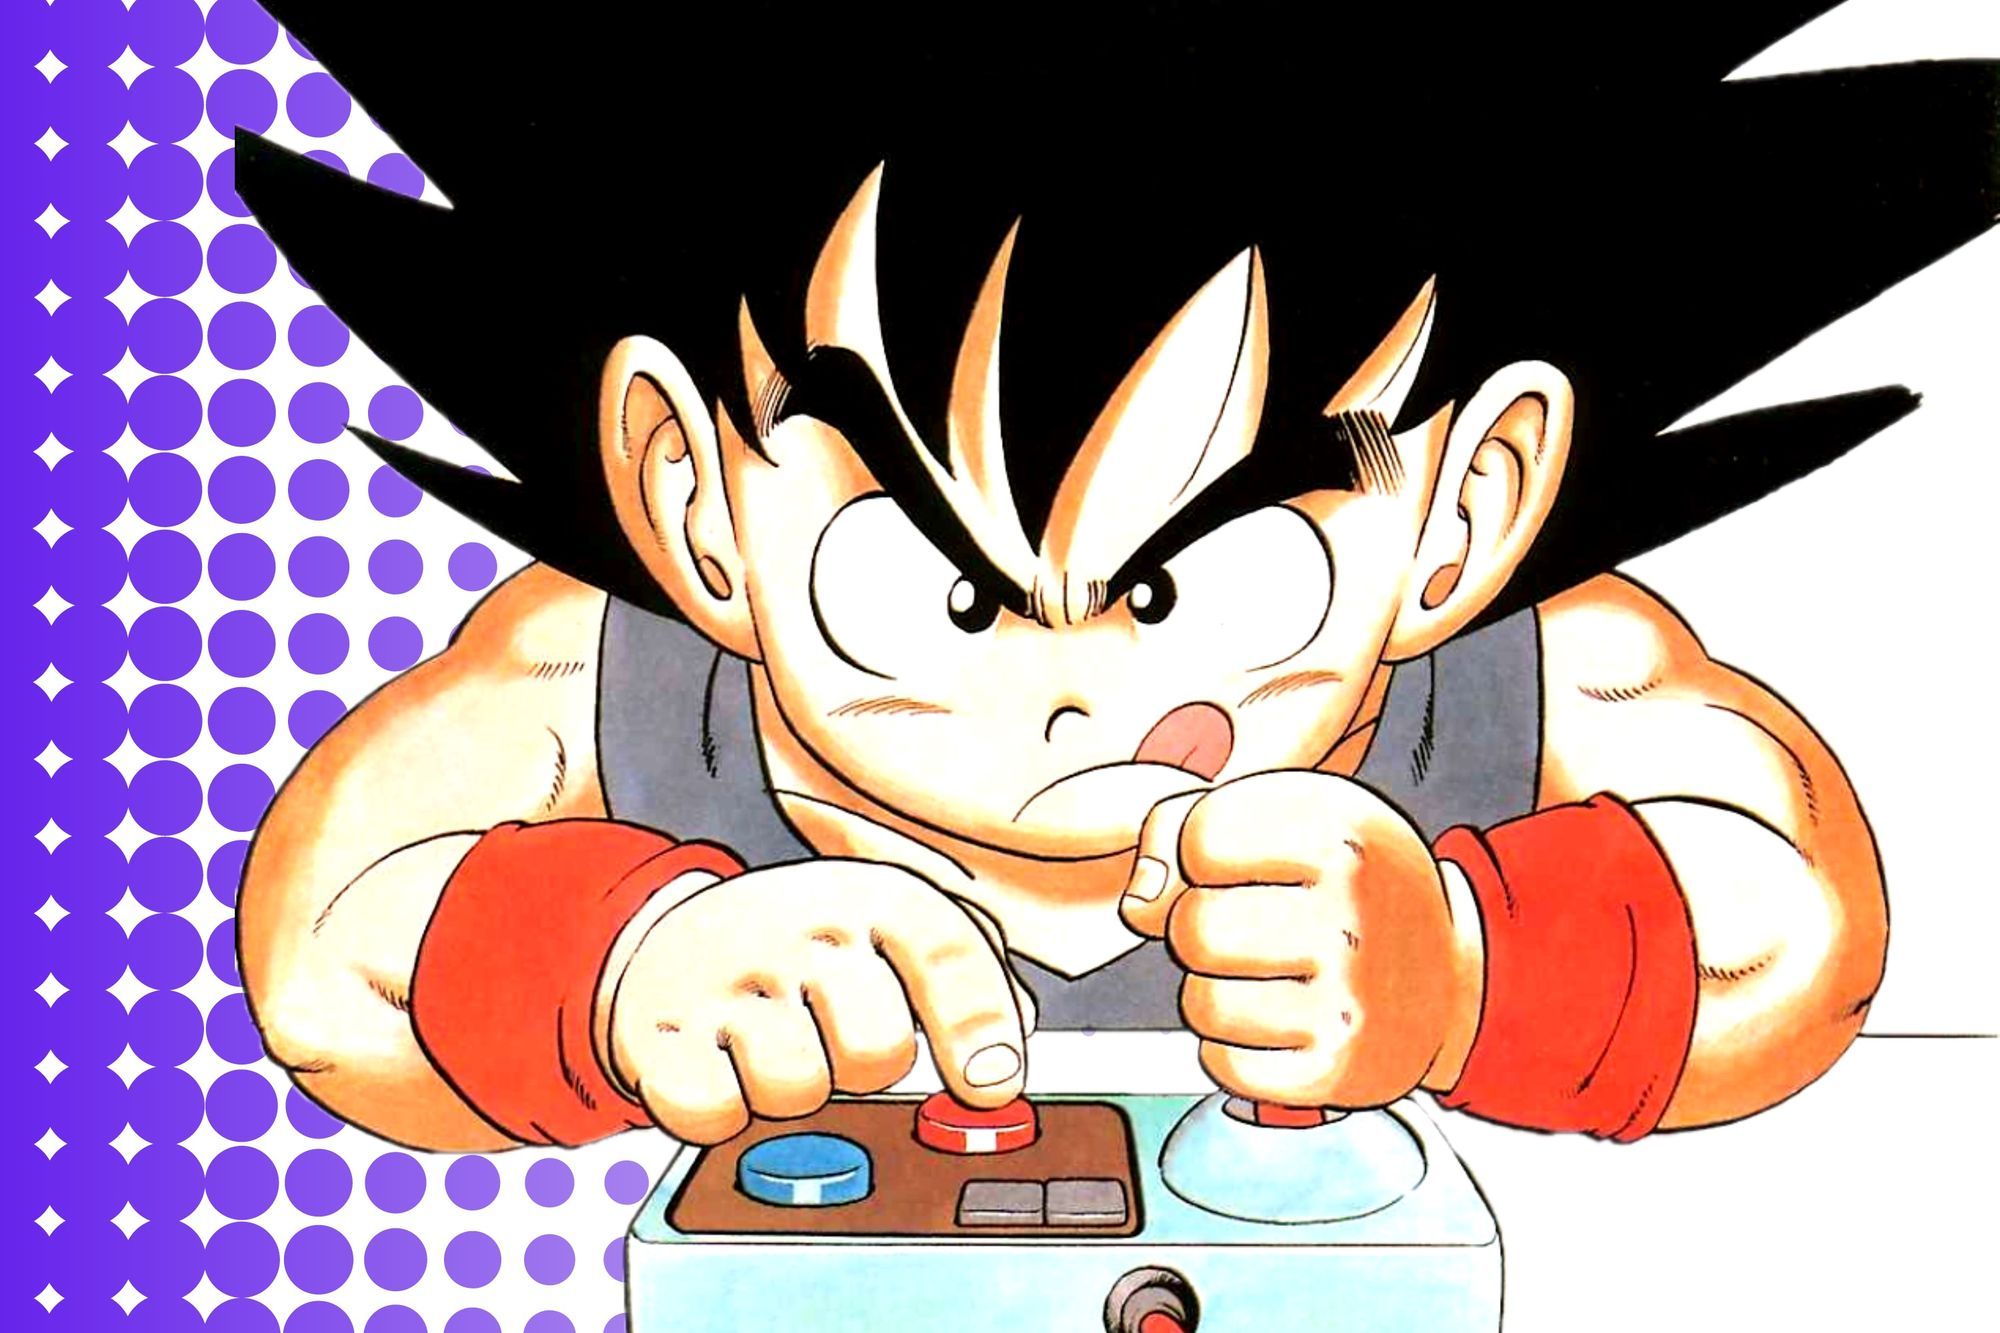 How Dragon Ball Broke into the Gaming Realm